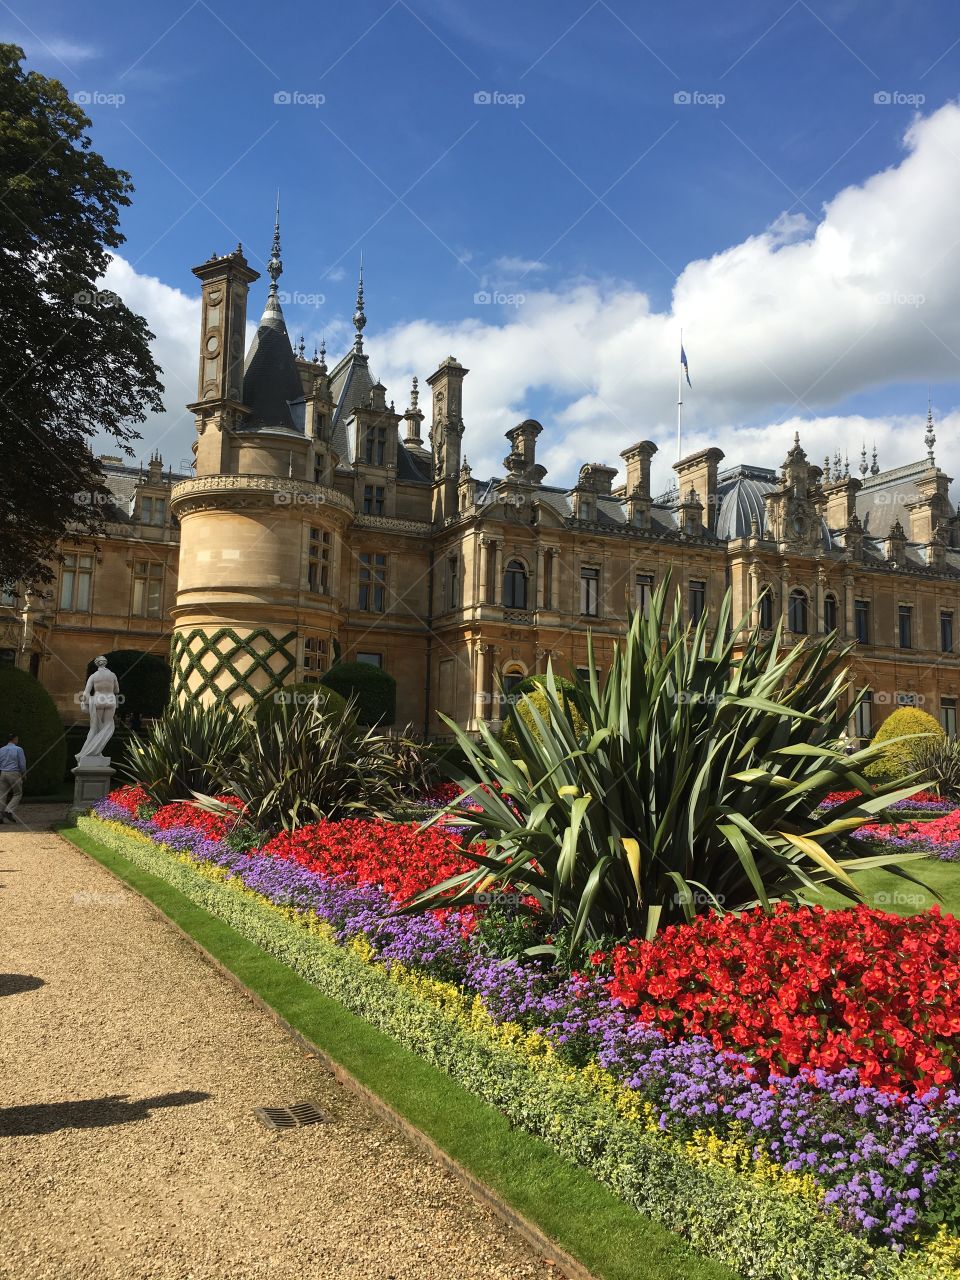 Waddesdon Manor
Rounding the corner 
A fine example of french architecture and garden fantasy